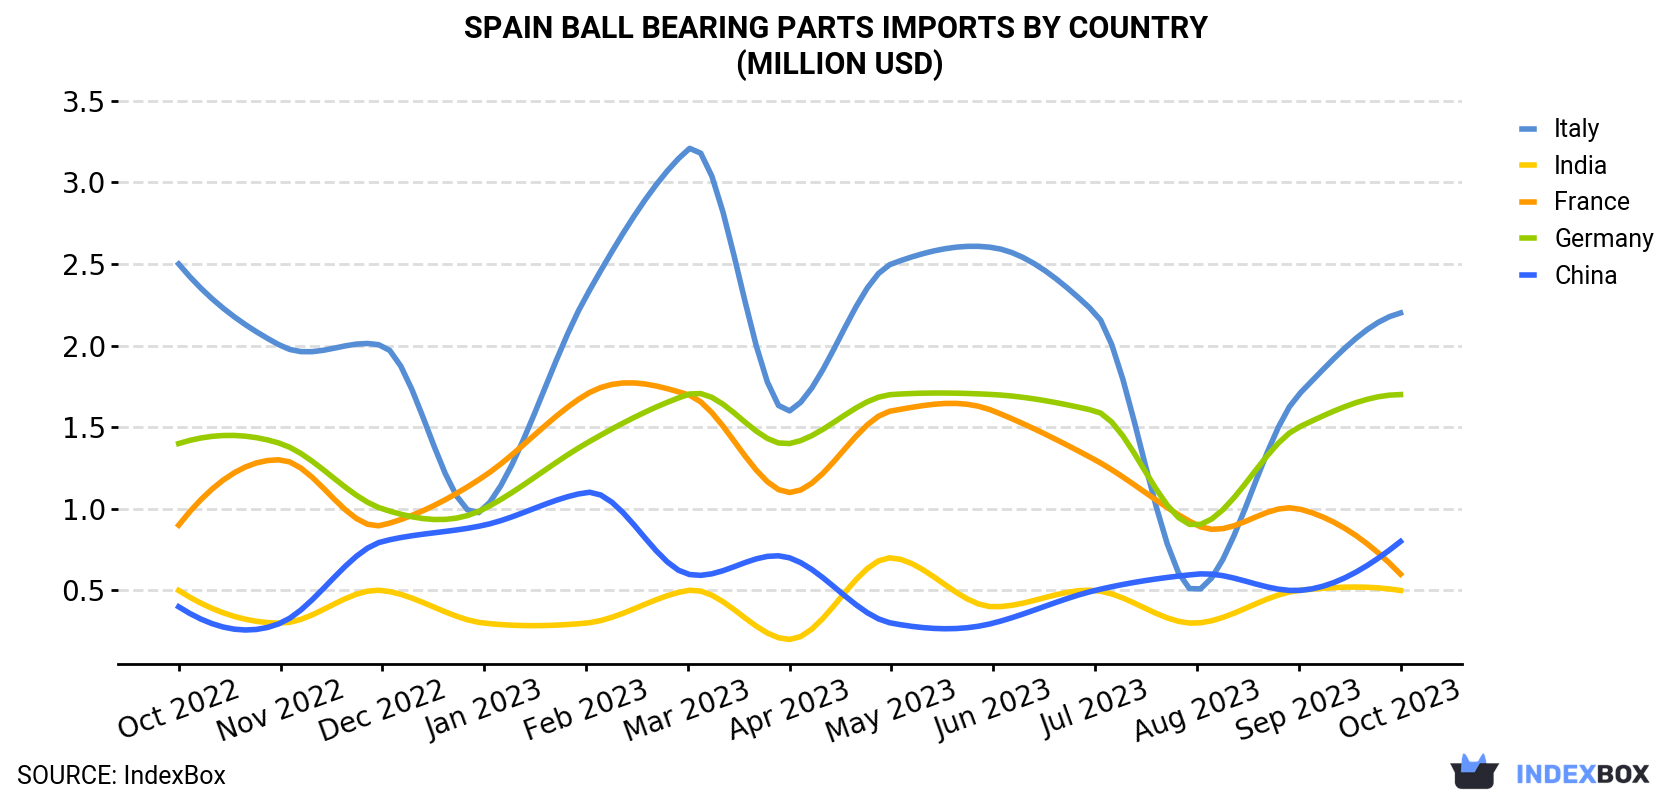 Spain Ball Bearing Parts Imports By Country (Million USD)